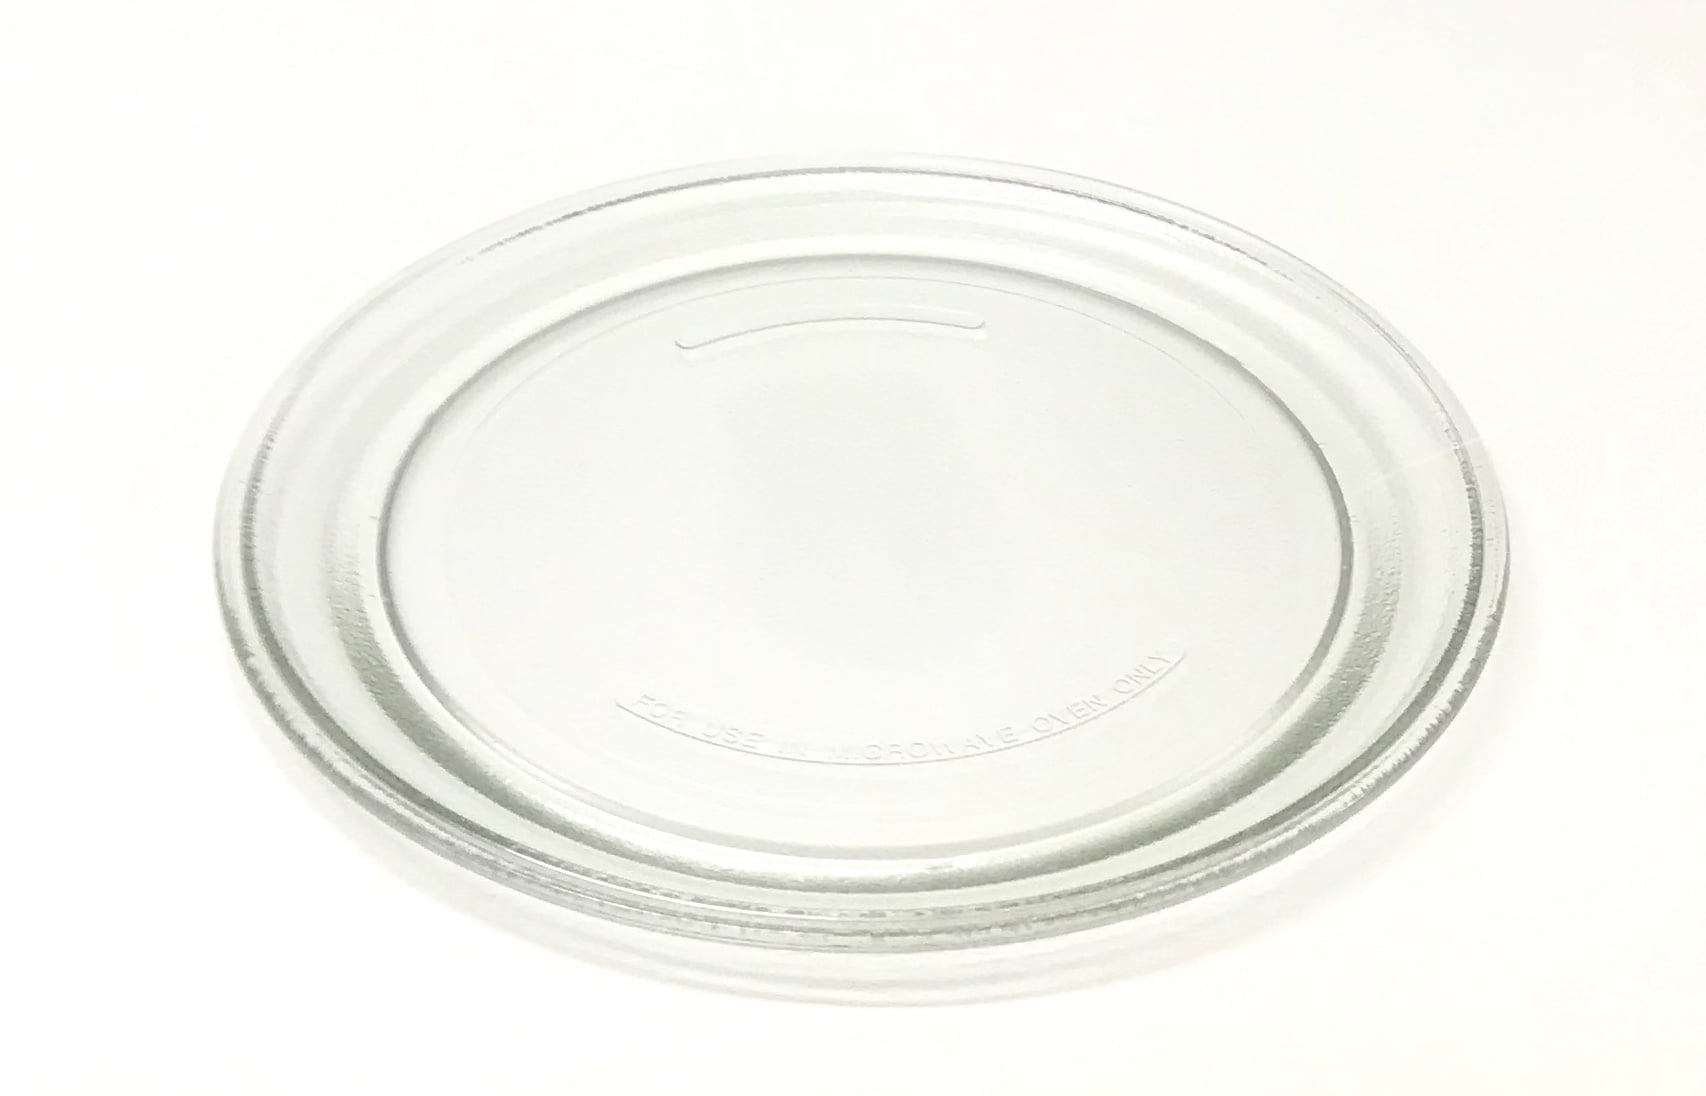 Generic 12 3/8" Microwave Glass Turntable Plate Tray for Frigidaire 5304509437 